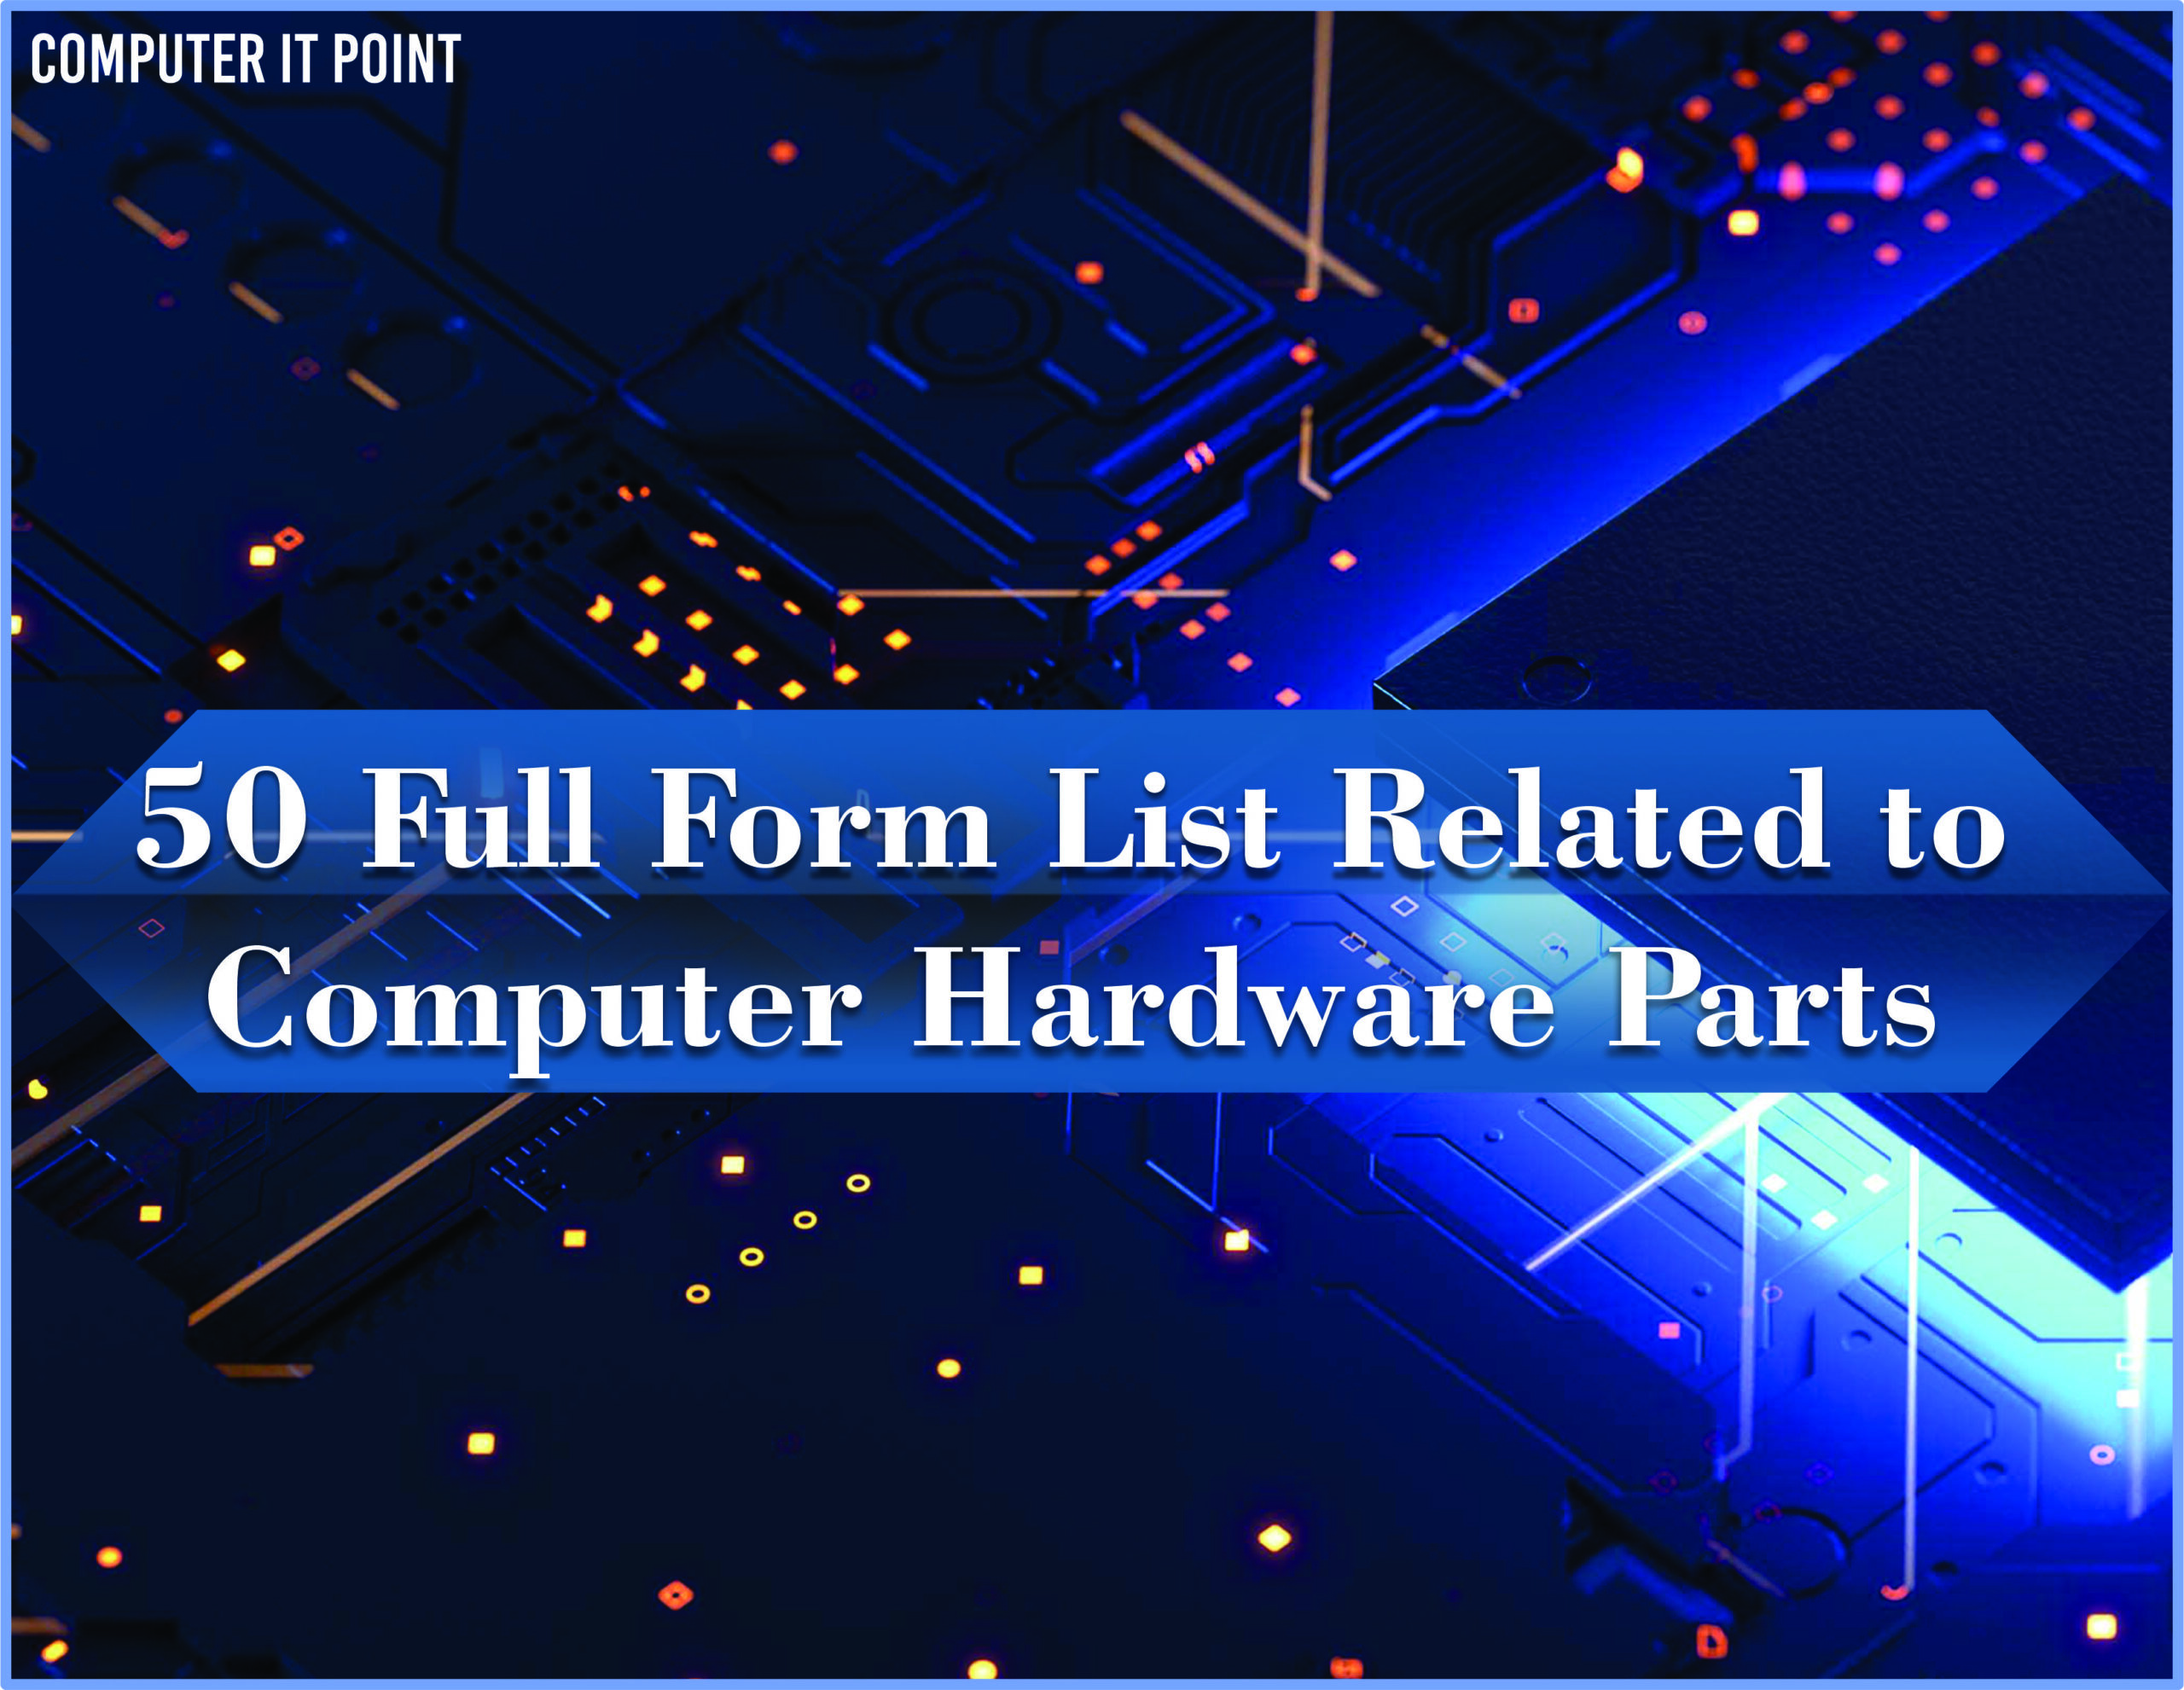 50 Full Form List Related to Computer Hardware Parts